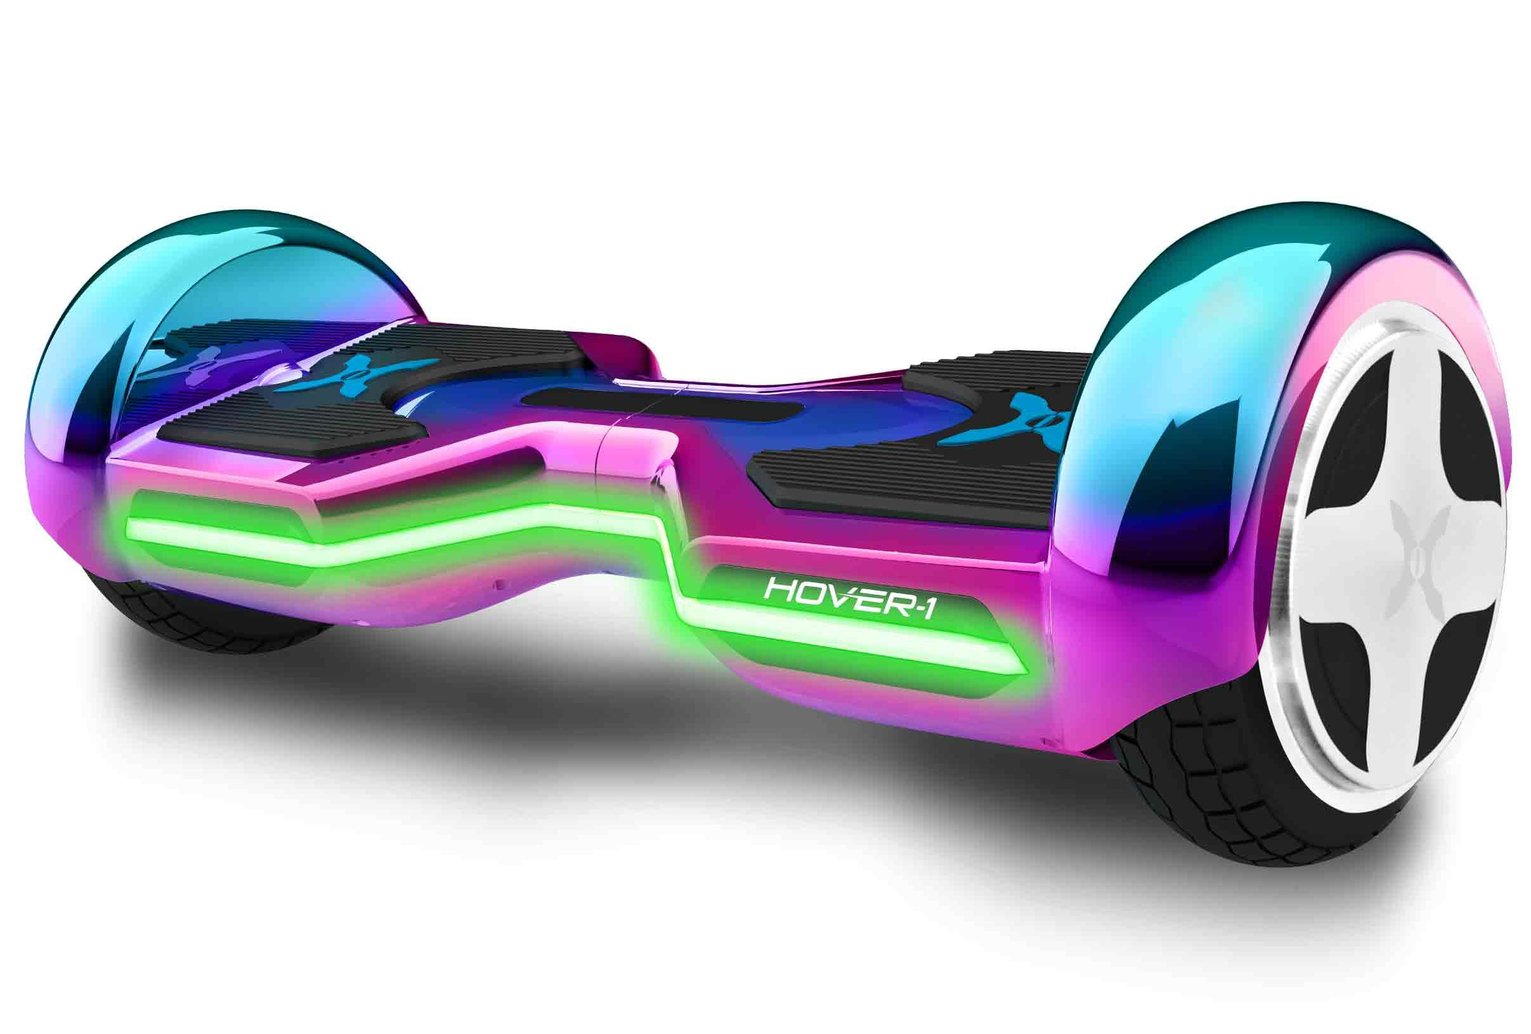 Hover-1 Horizon 8 Inch Wheel Iridescent Hoverboard Review